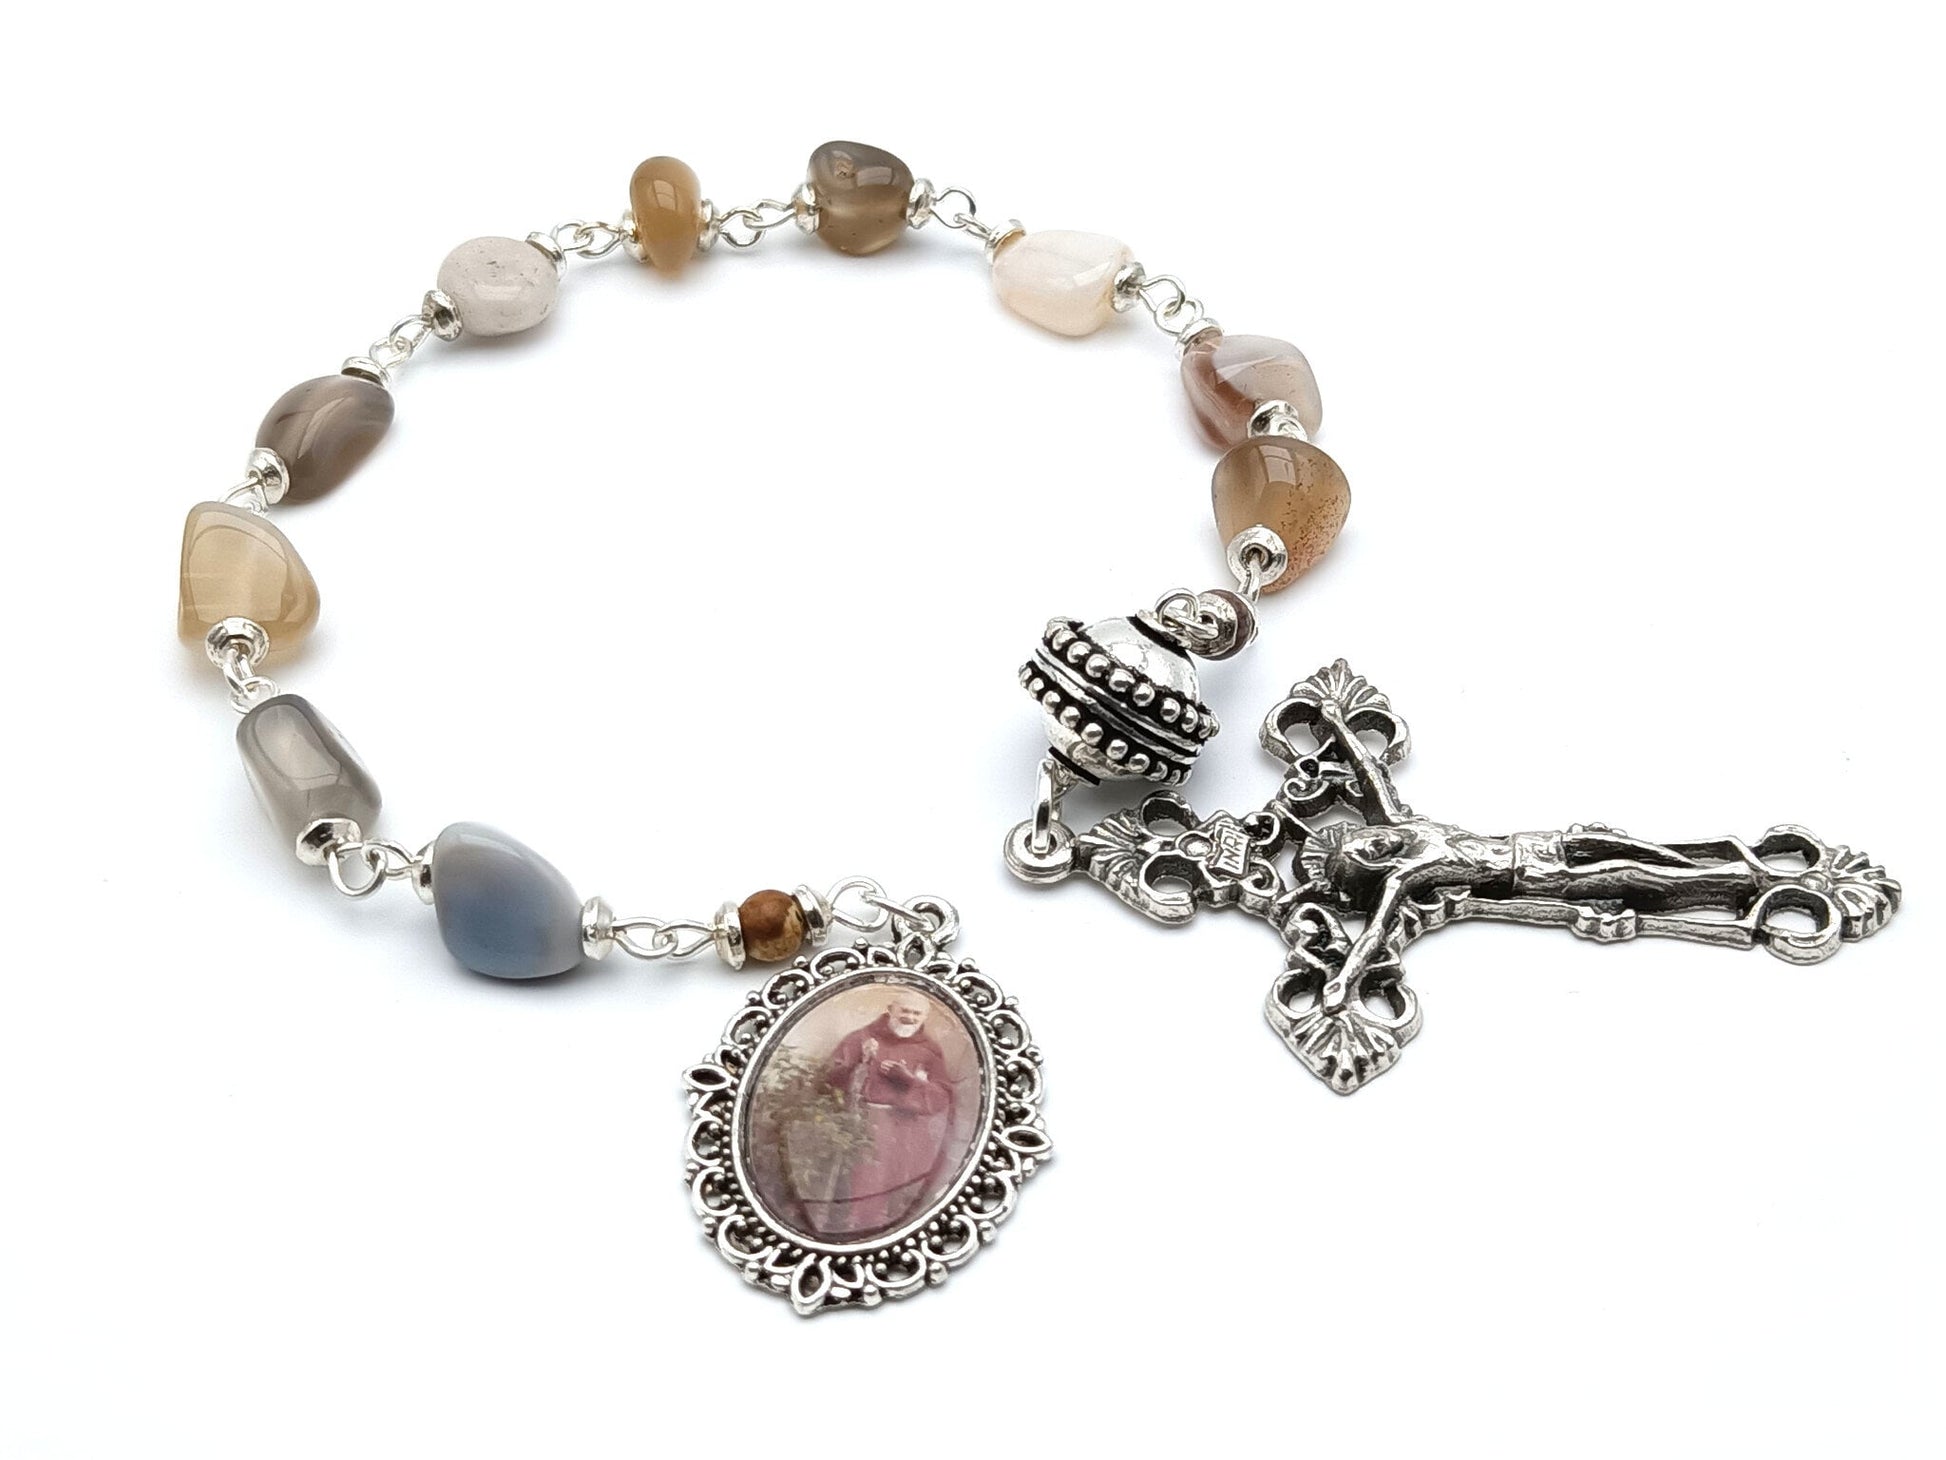 Saint Padre Pio unique rosary beads single decade or tenner rosary with agate gemstone beads, silver pater bead, crucifix and picture end medal.